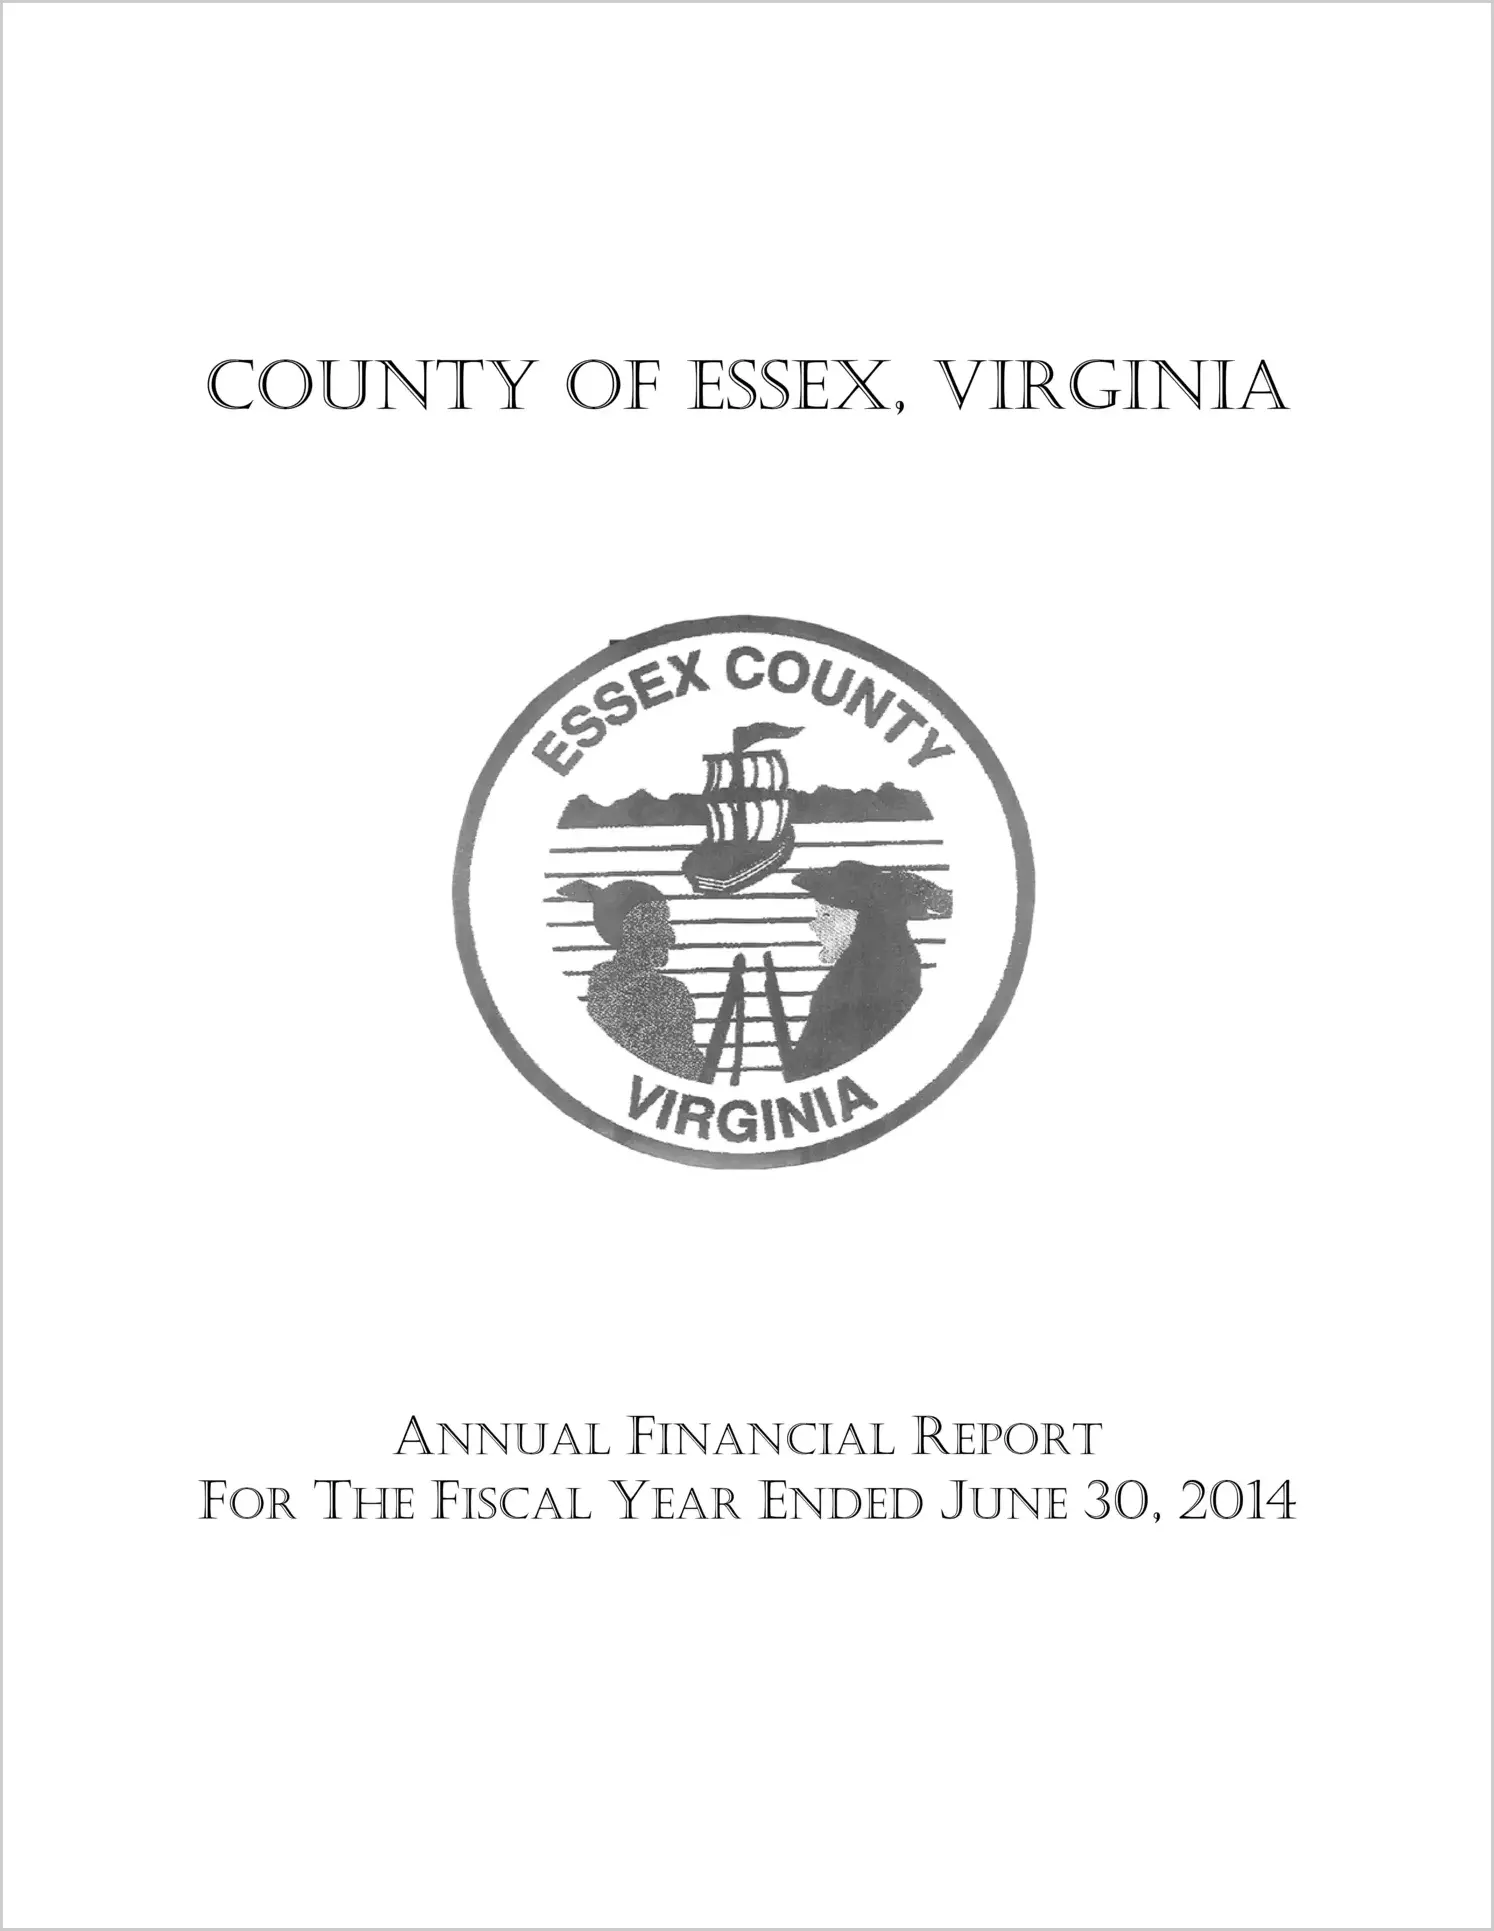 2014 Annual Financial Report for County of Essex